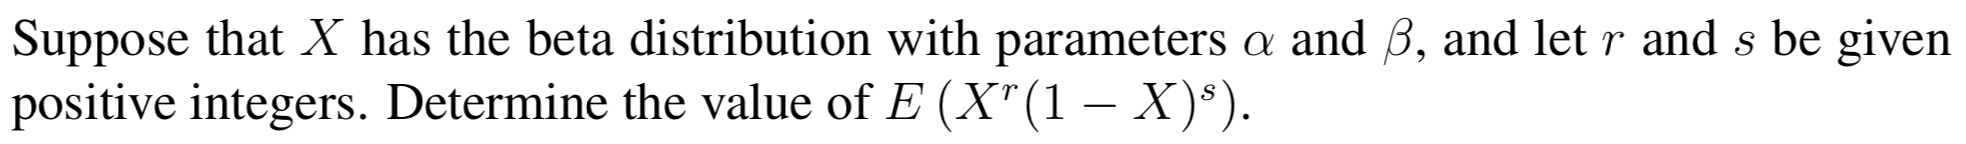 Suppose That X Has The Beta Distribution With Parameters A And B And Let R And S Be Given Positive Integers Determine 1